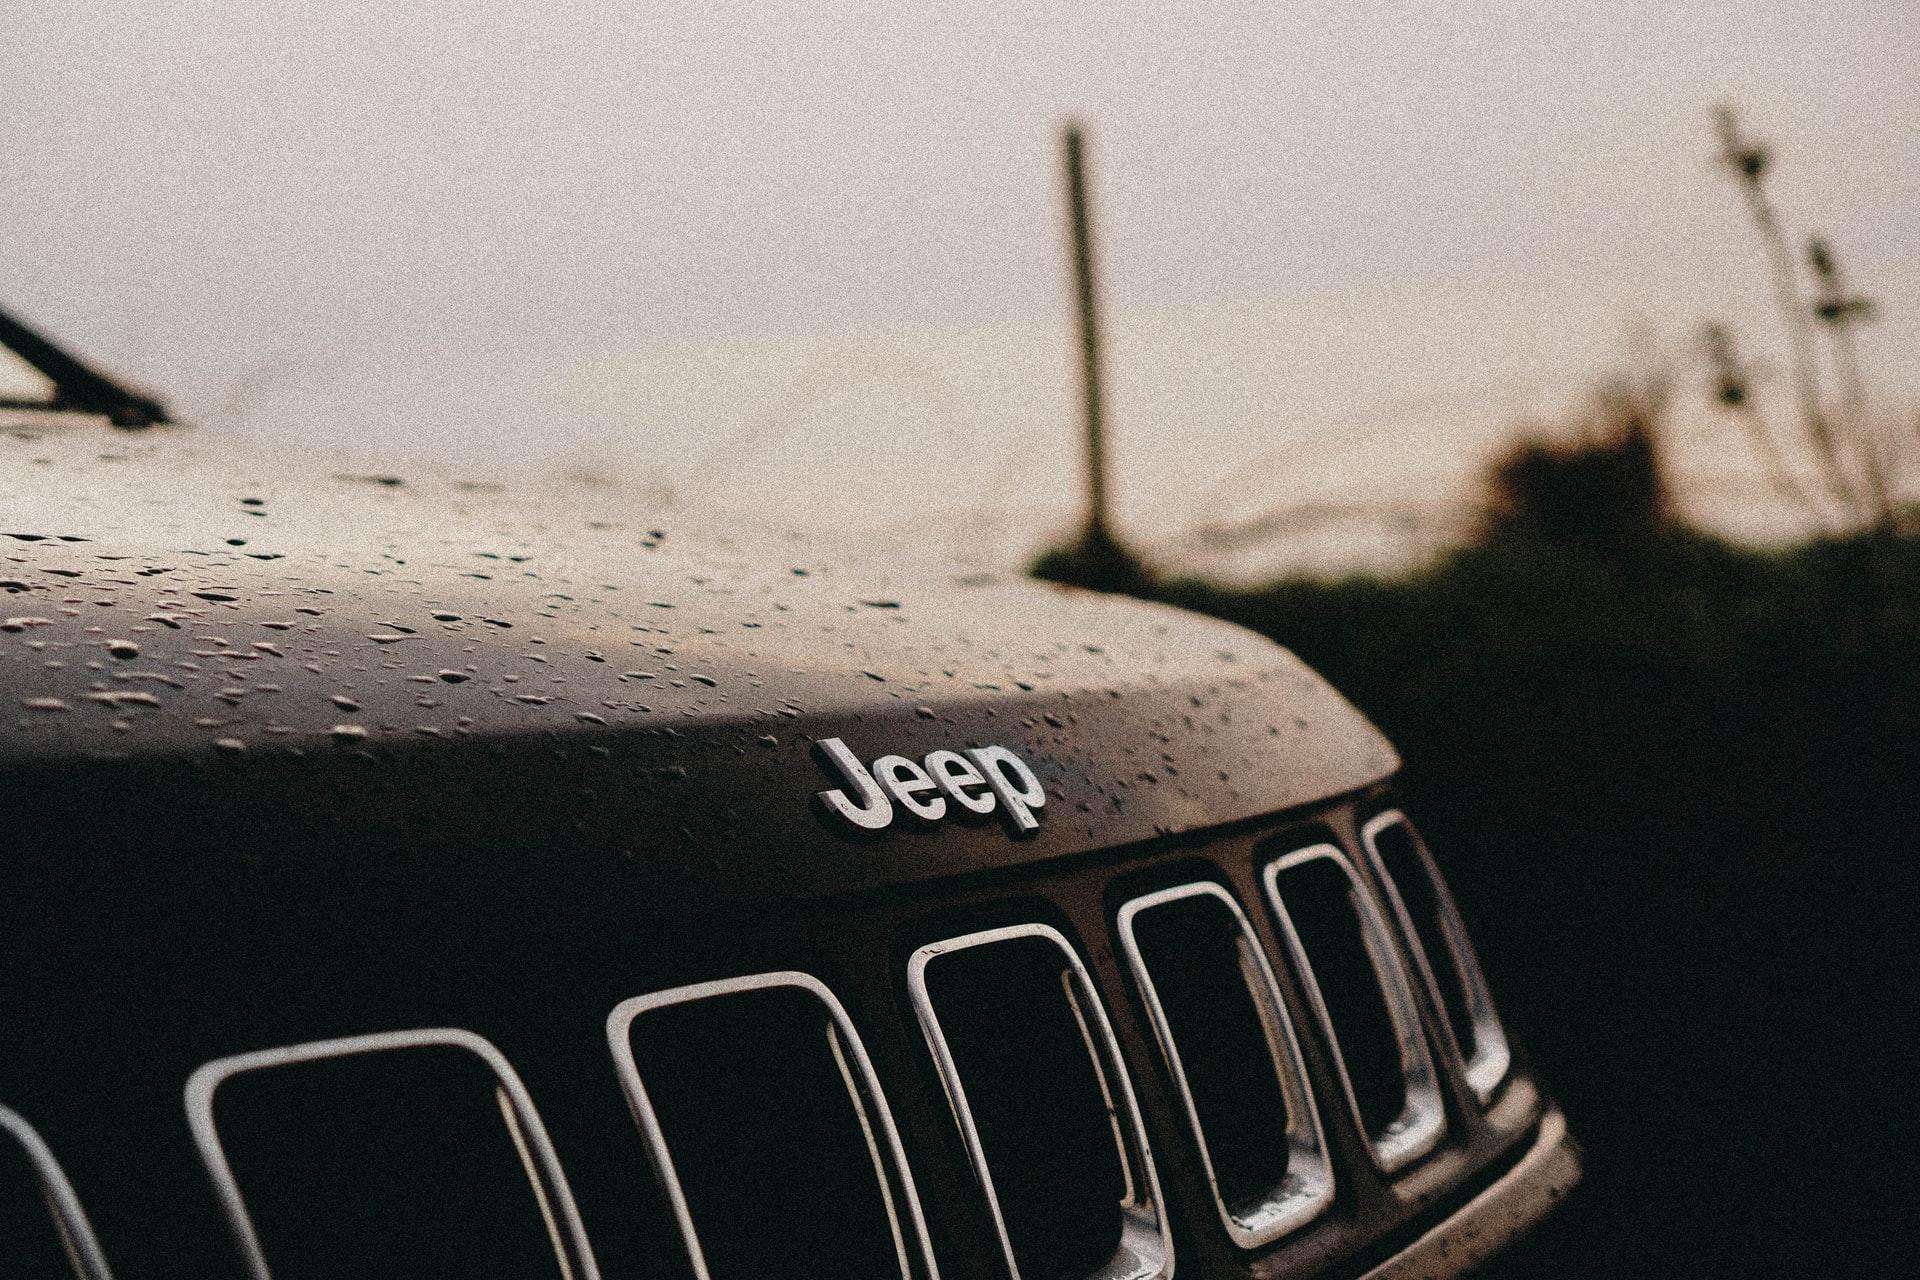 Here’s what you can expect to pay for a 2016 Jeep Grand Cherokee 75th Anniversary edition.